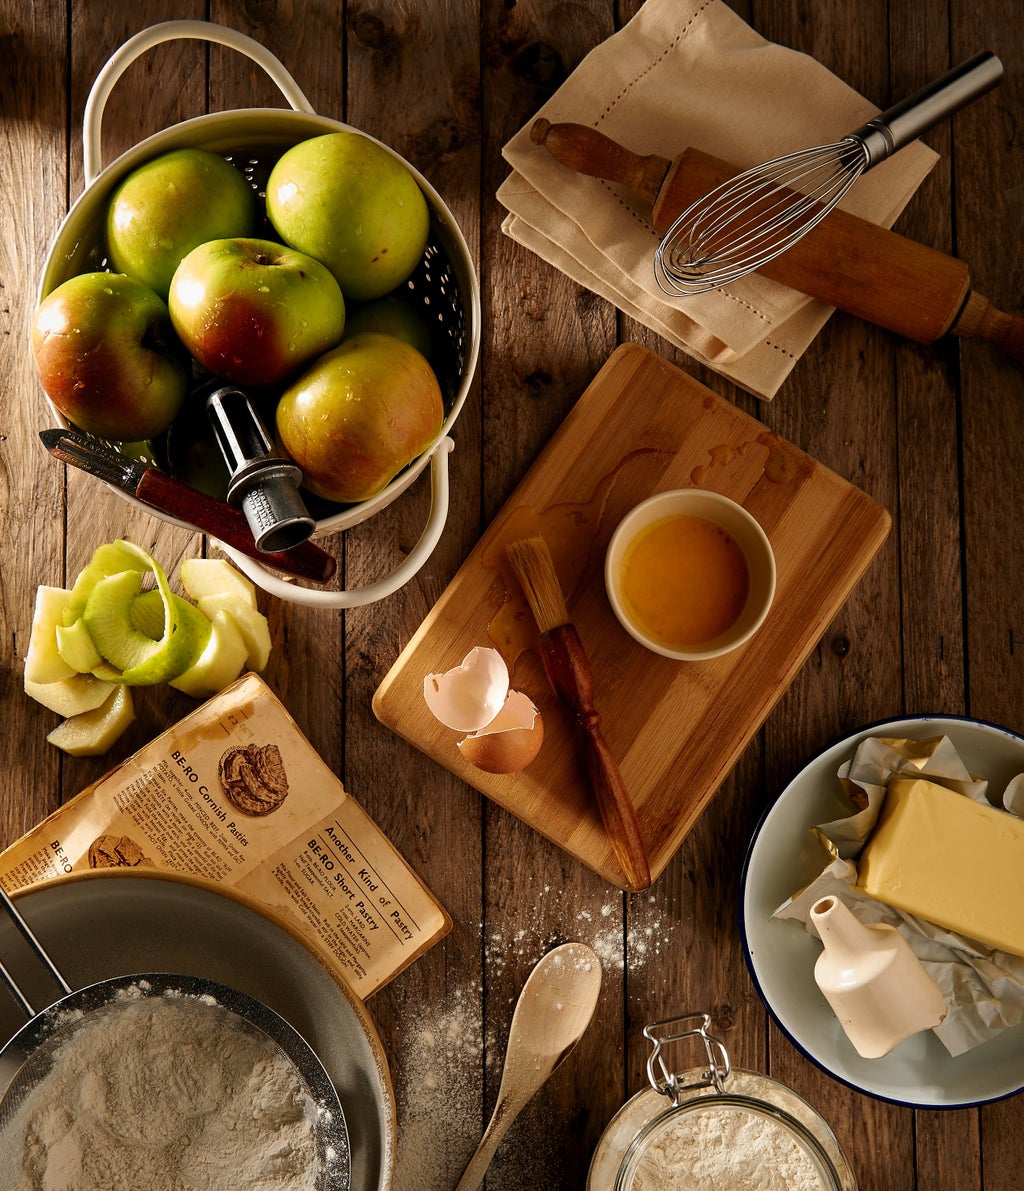 Ingredients for baking a pie on a wooden countertop